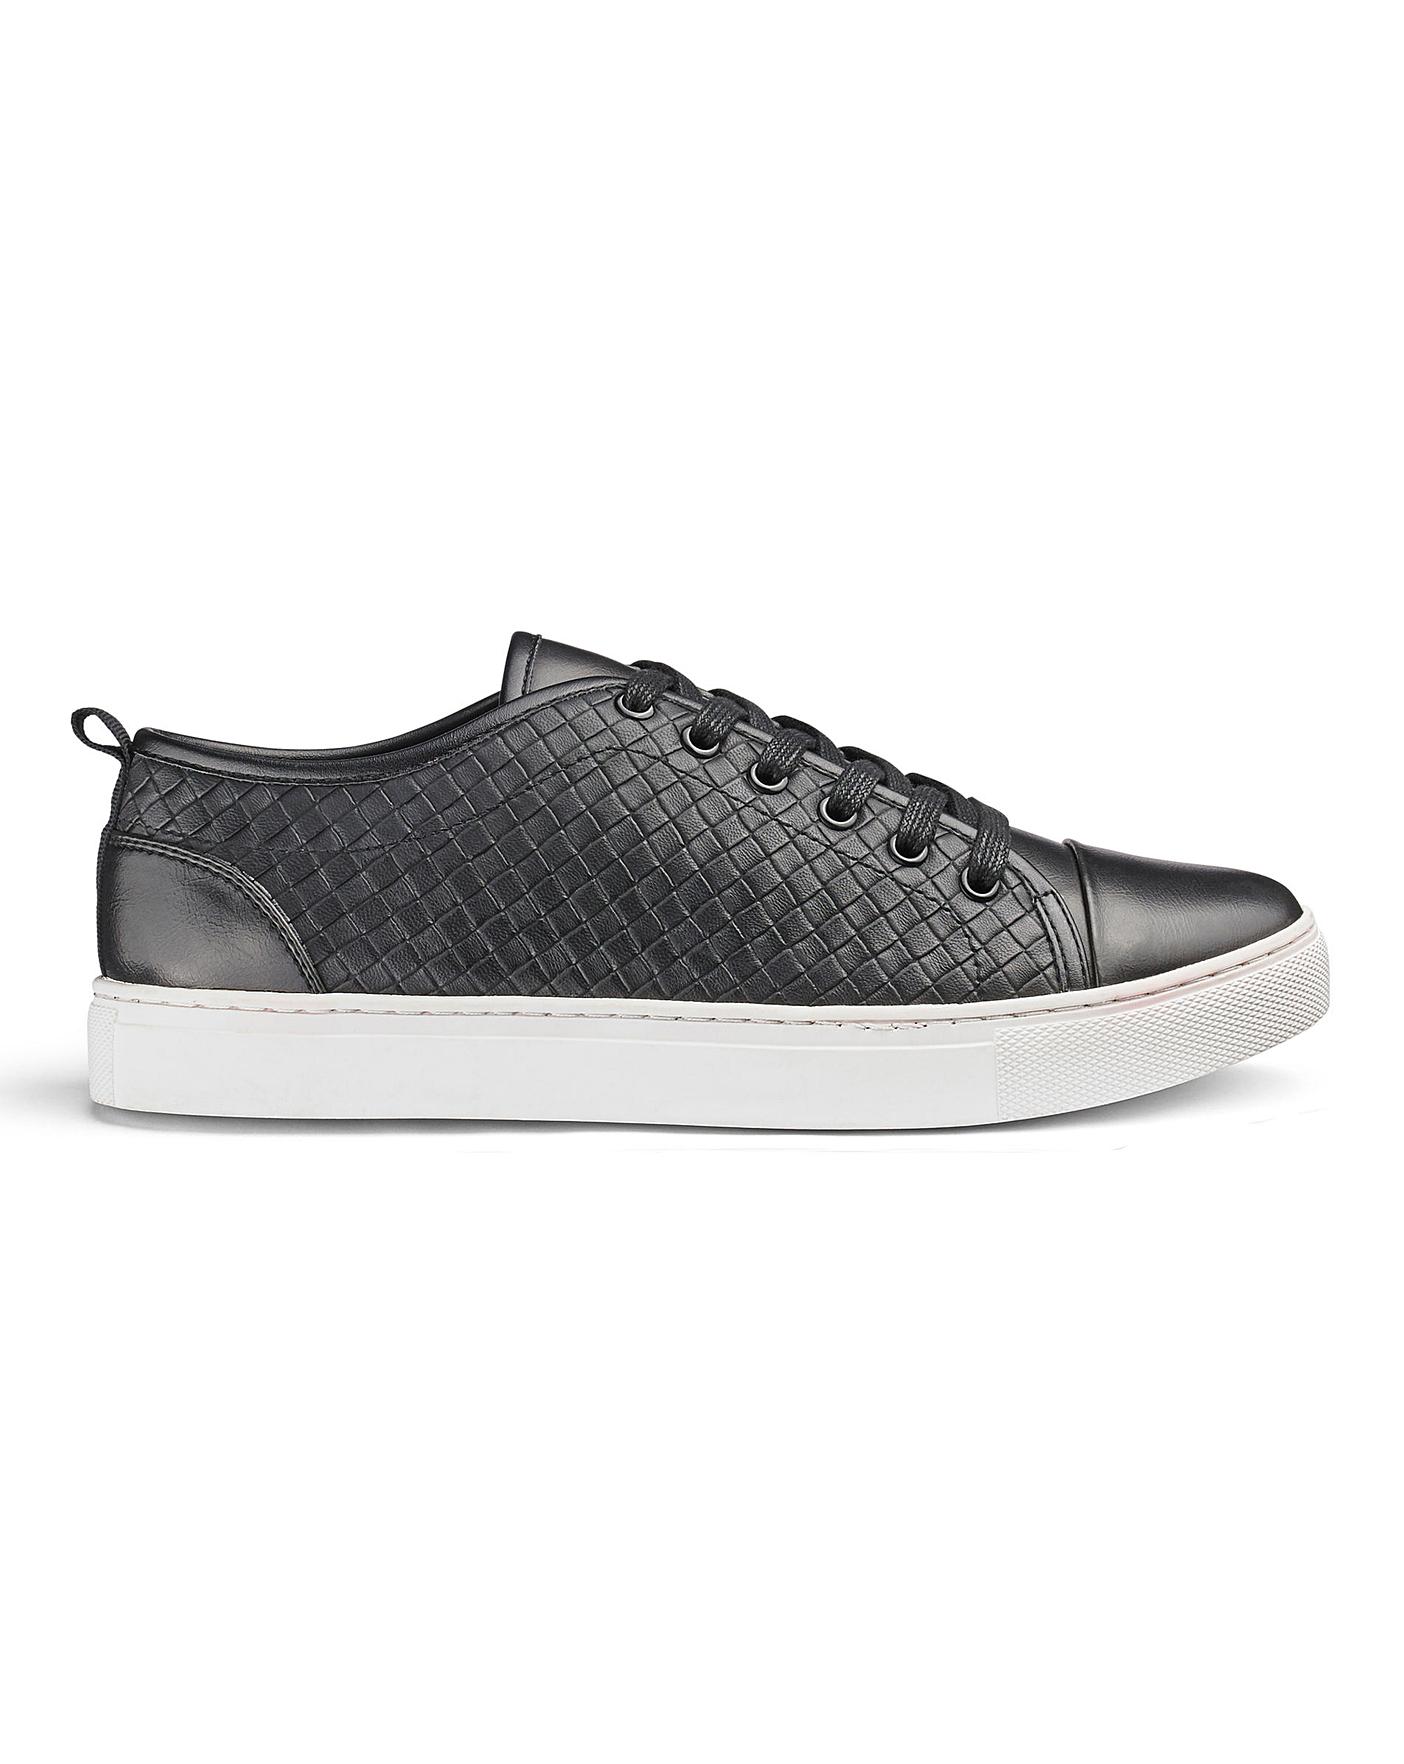 Woven Lace Up Casual Shoes